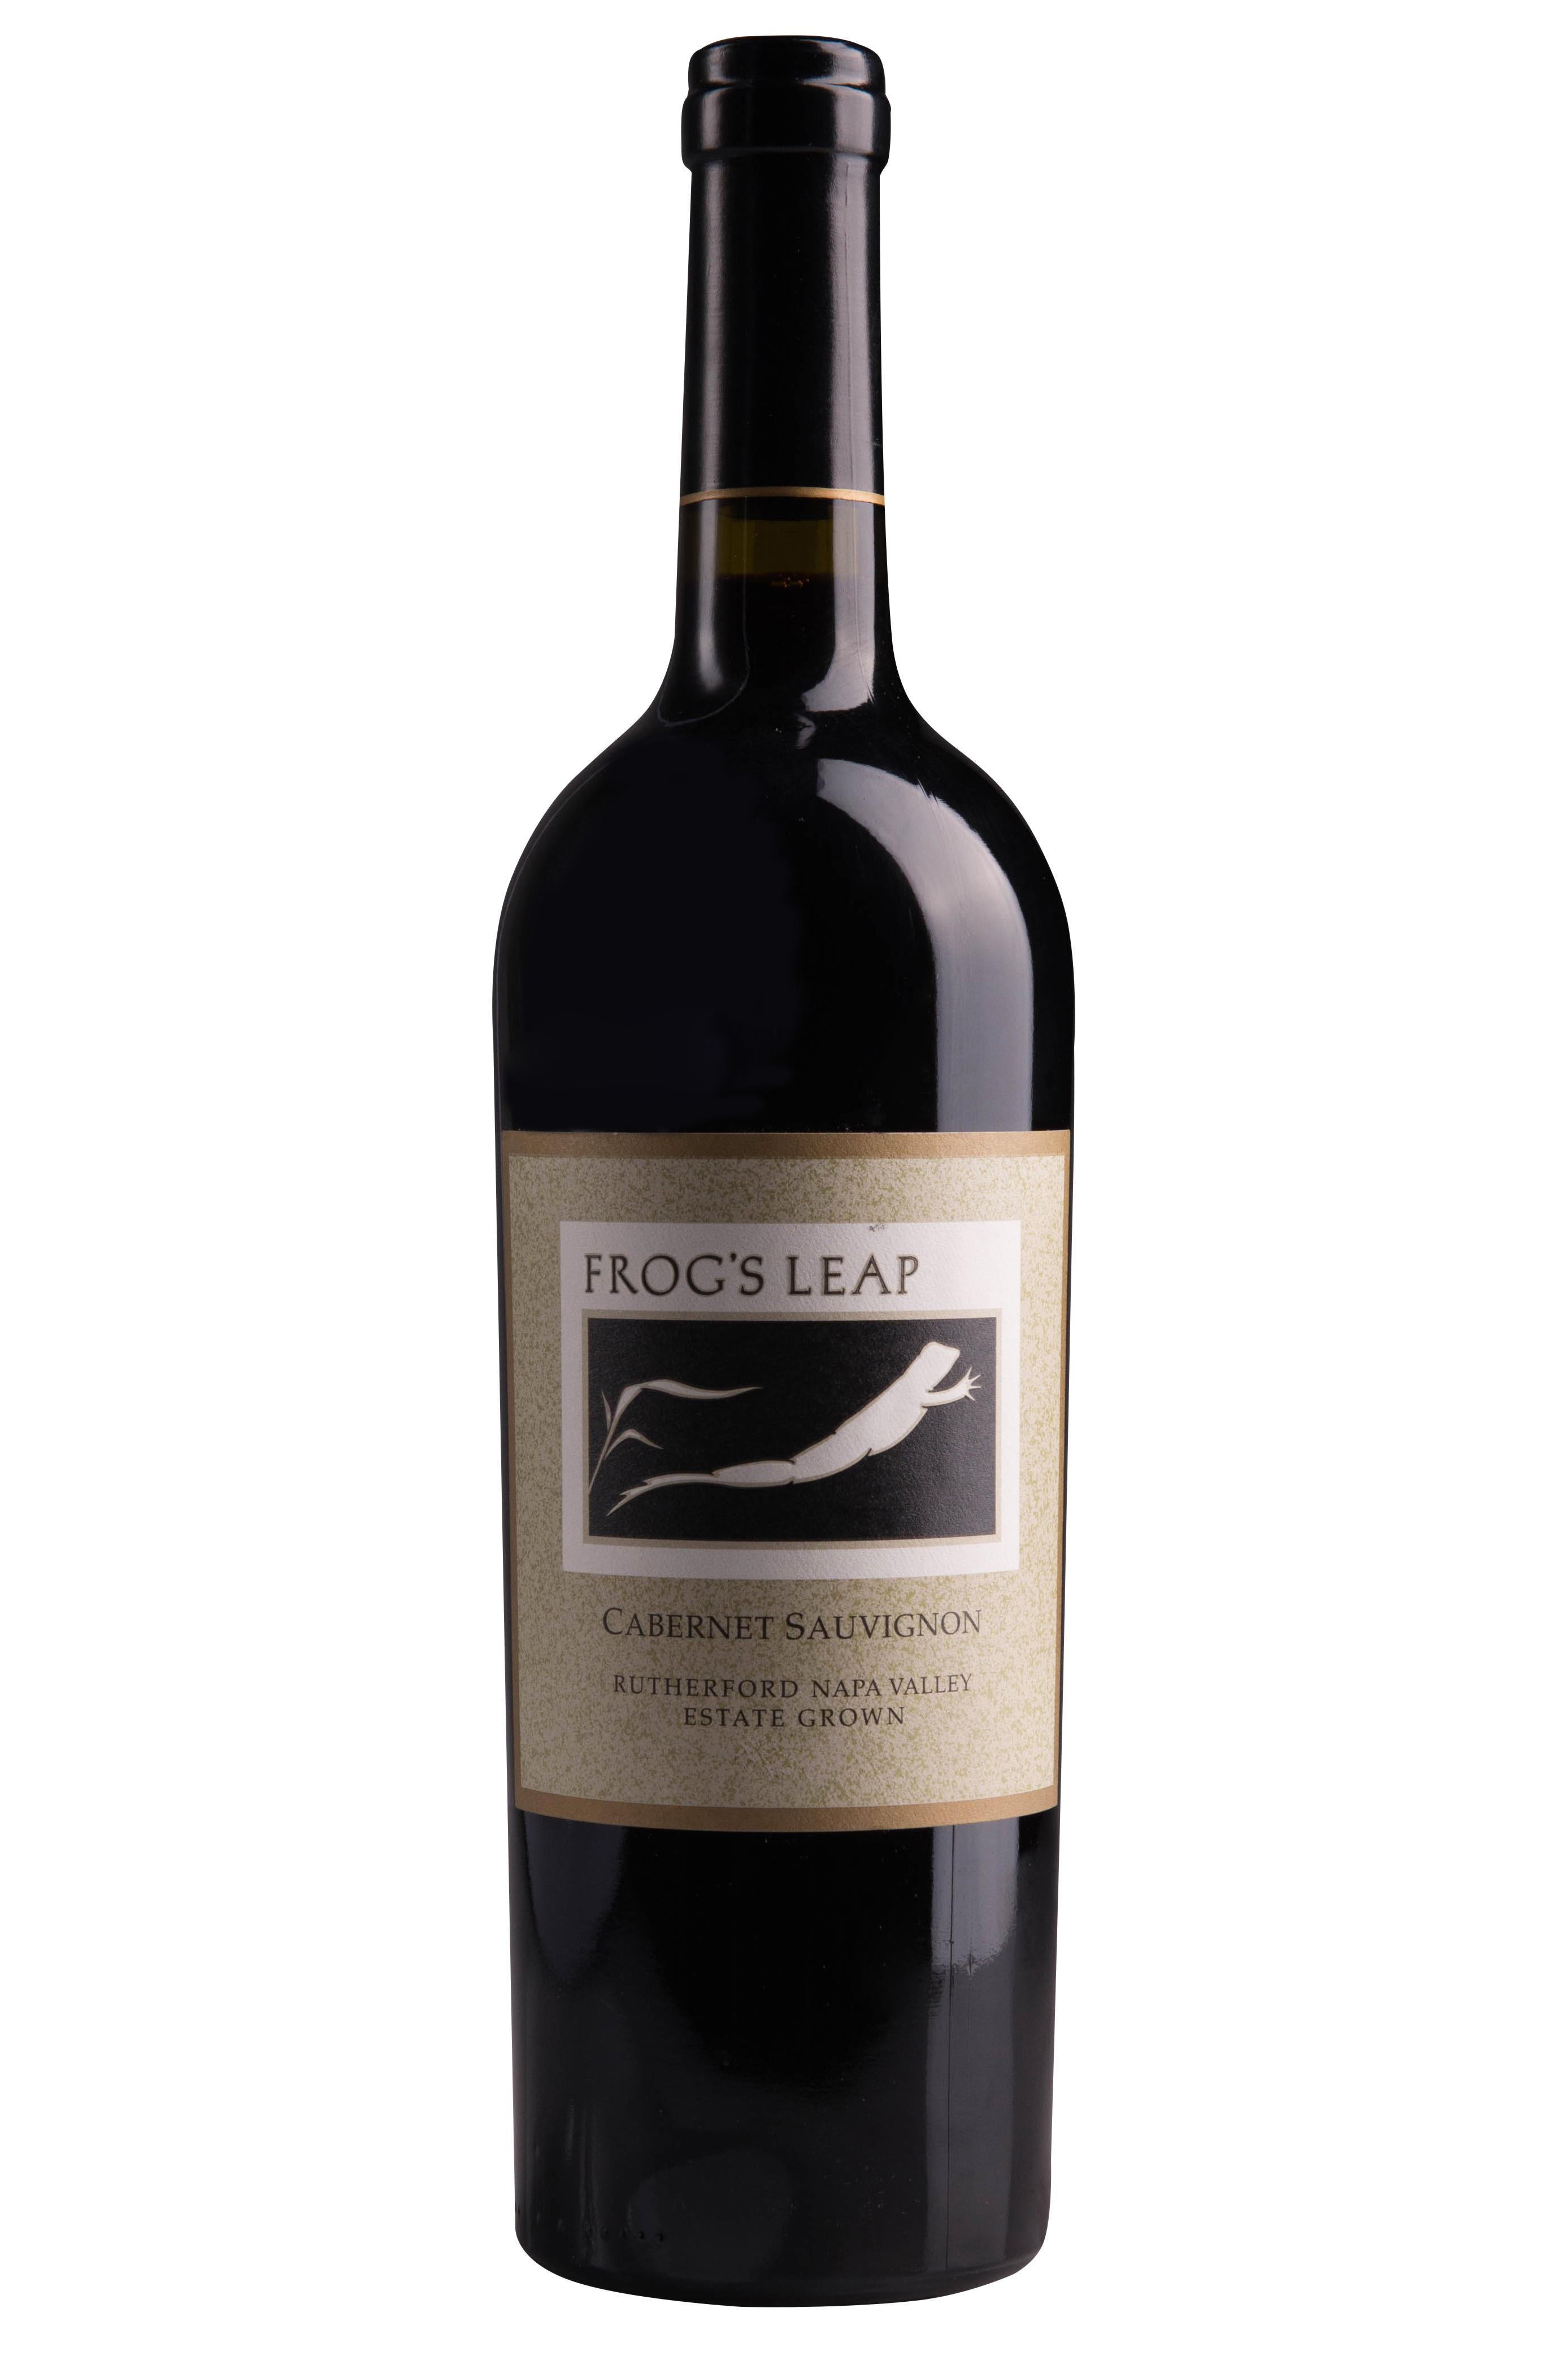 2020 Frog's Leap Cabernet Sauvignon, Rutherford